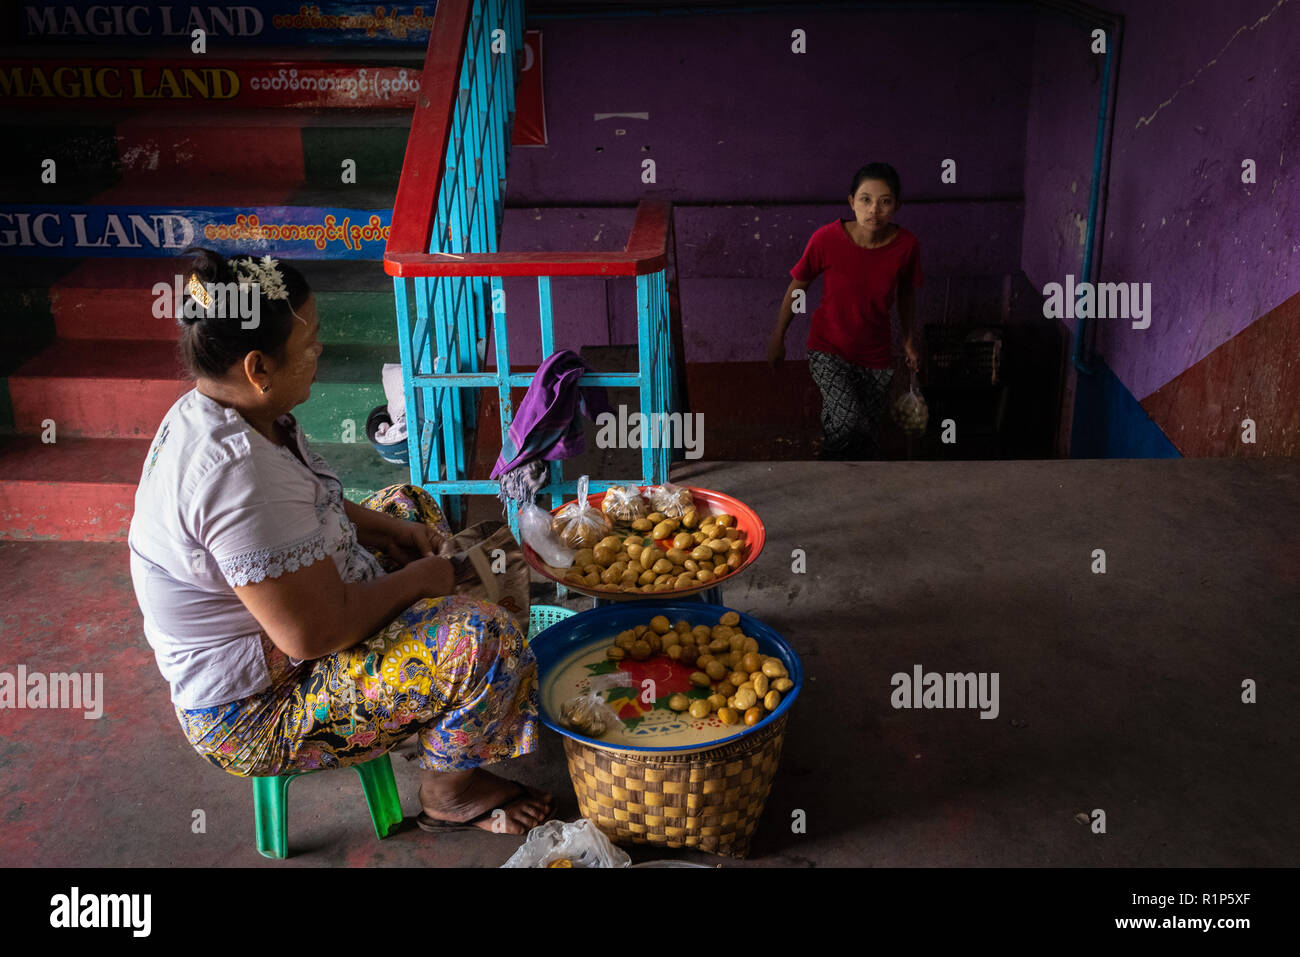 Woman walking up a staircase in the Magic Land Market, Mandalay, Myanmar. Stock Photo